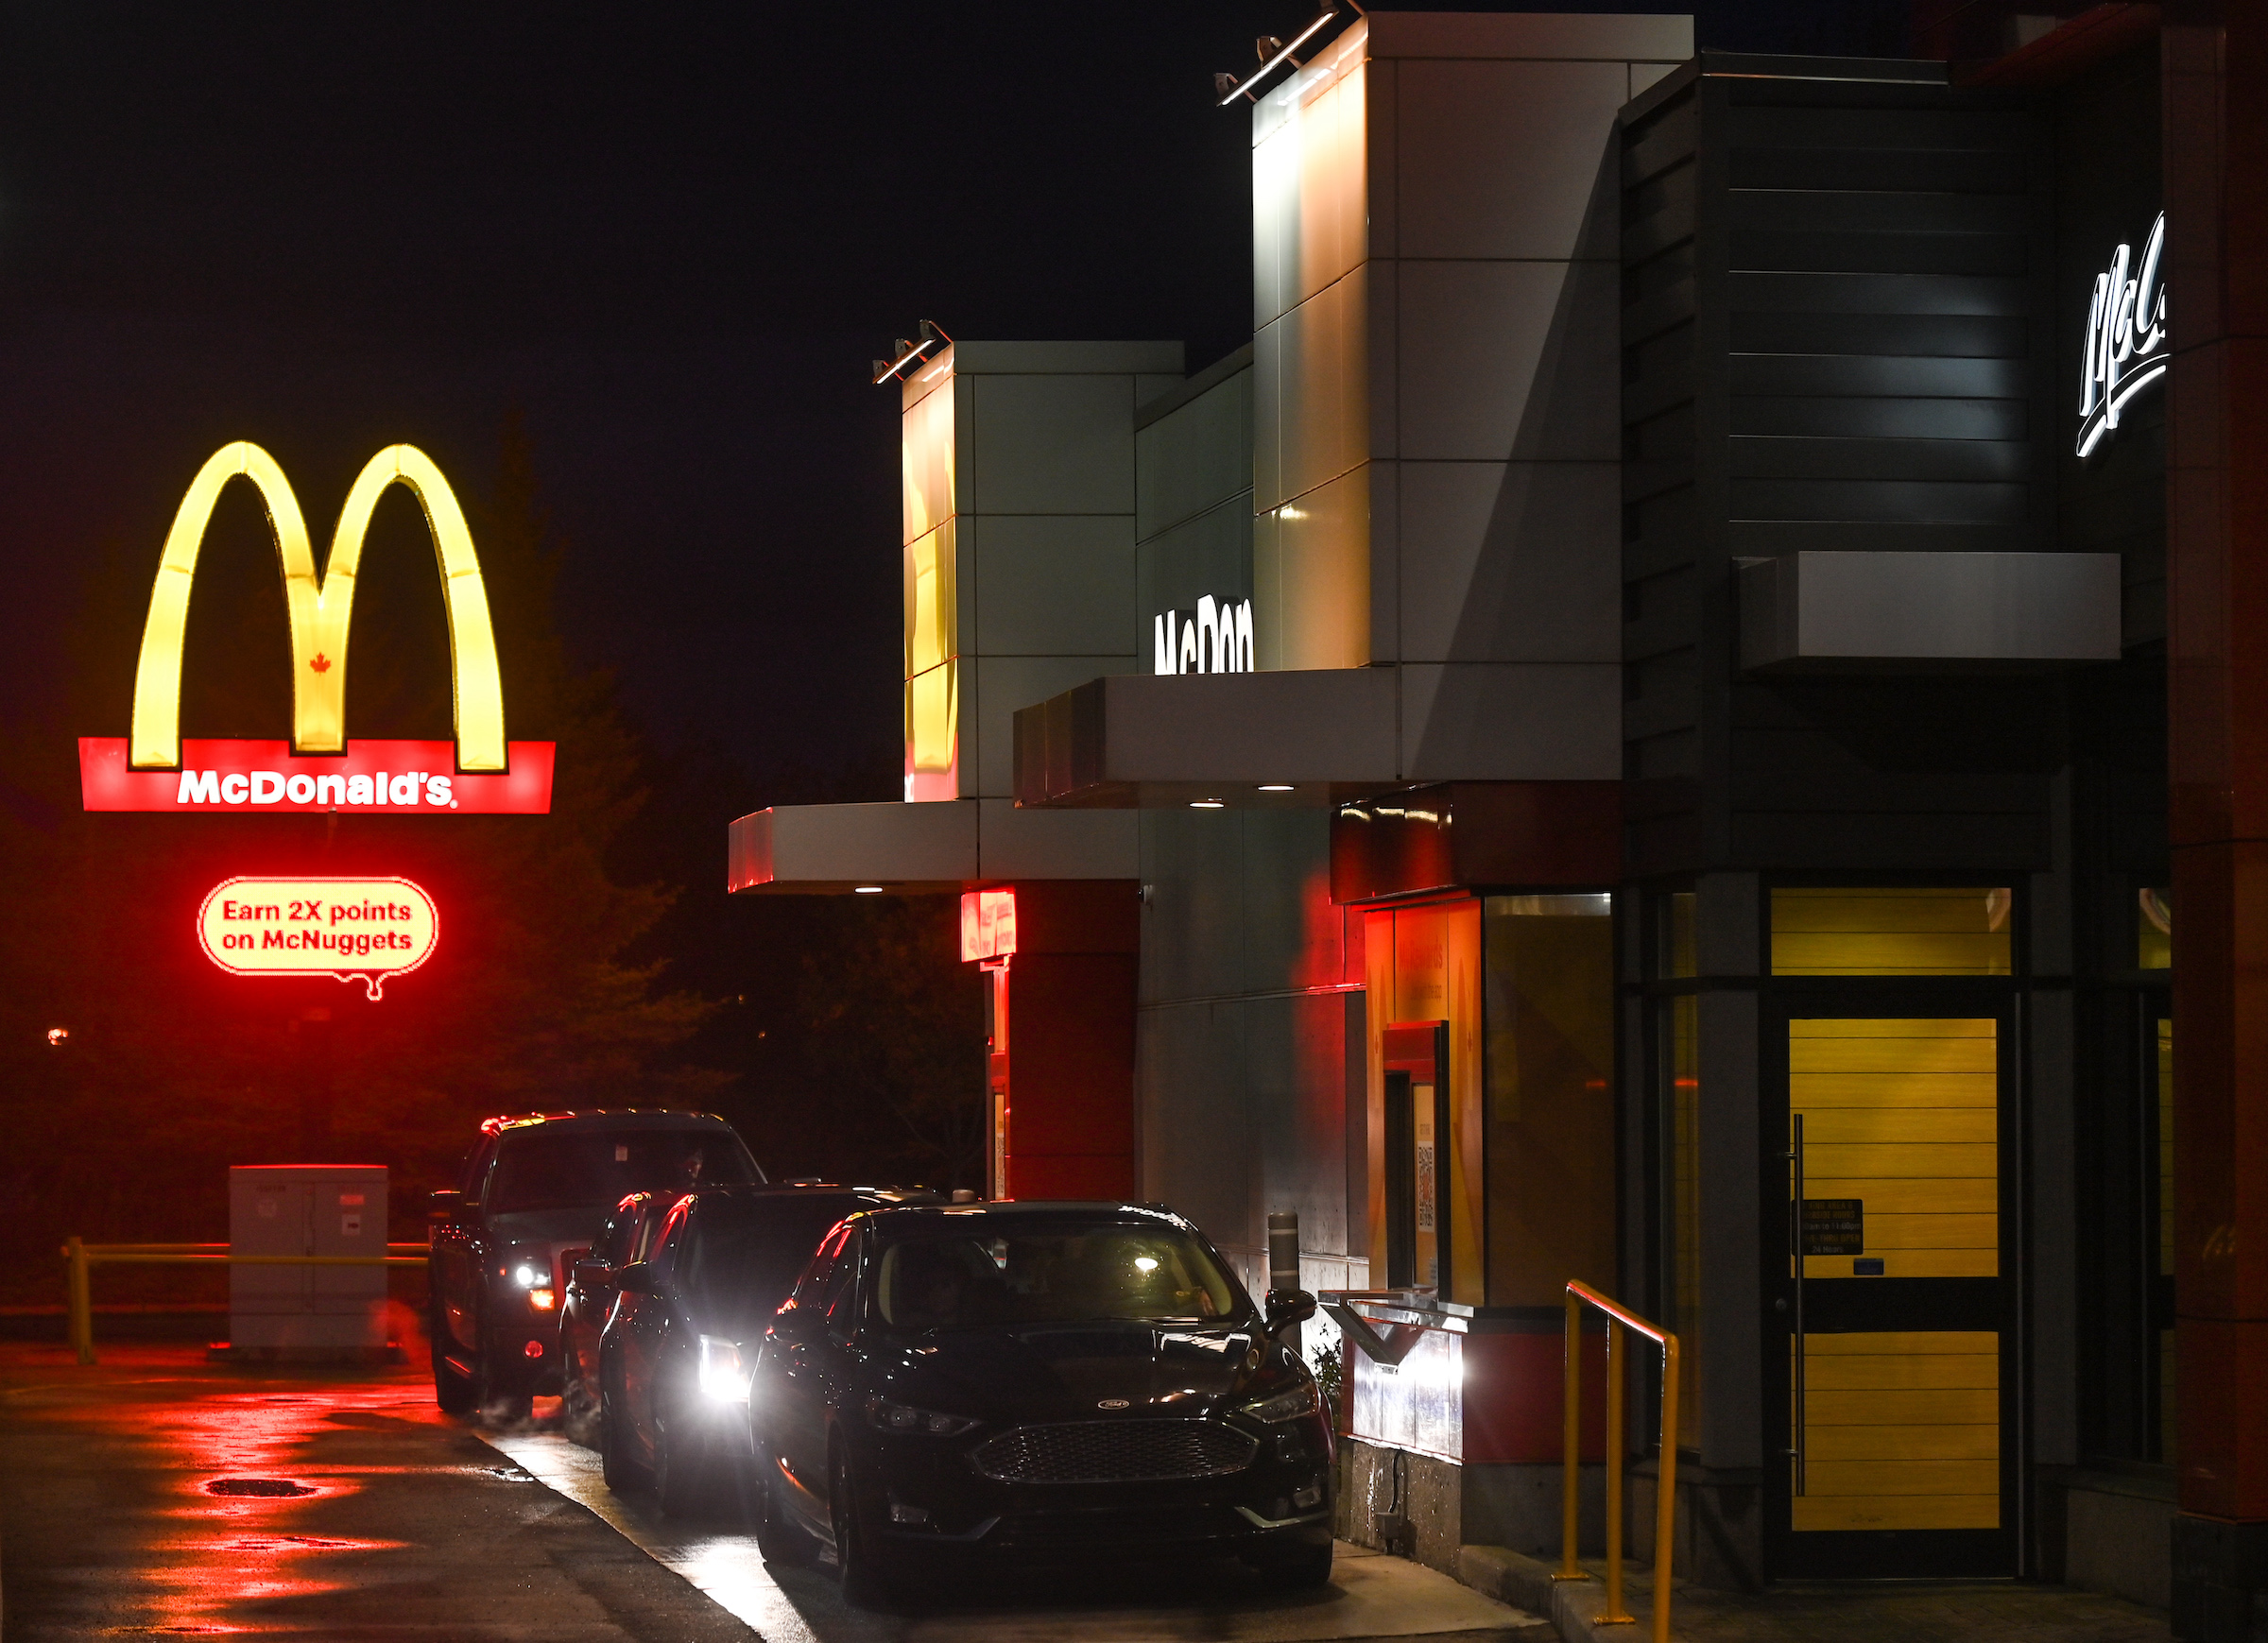 McDonald's in Kentucky Employed 10-Year-Olds Without Pay, Labor Officials  Find